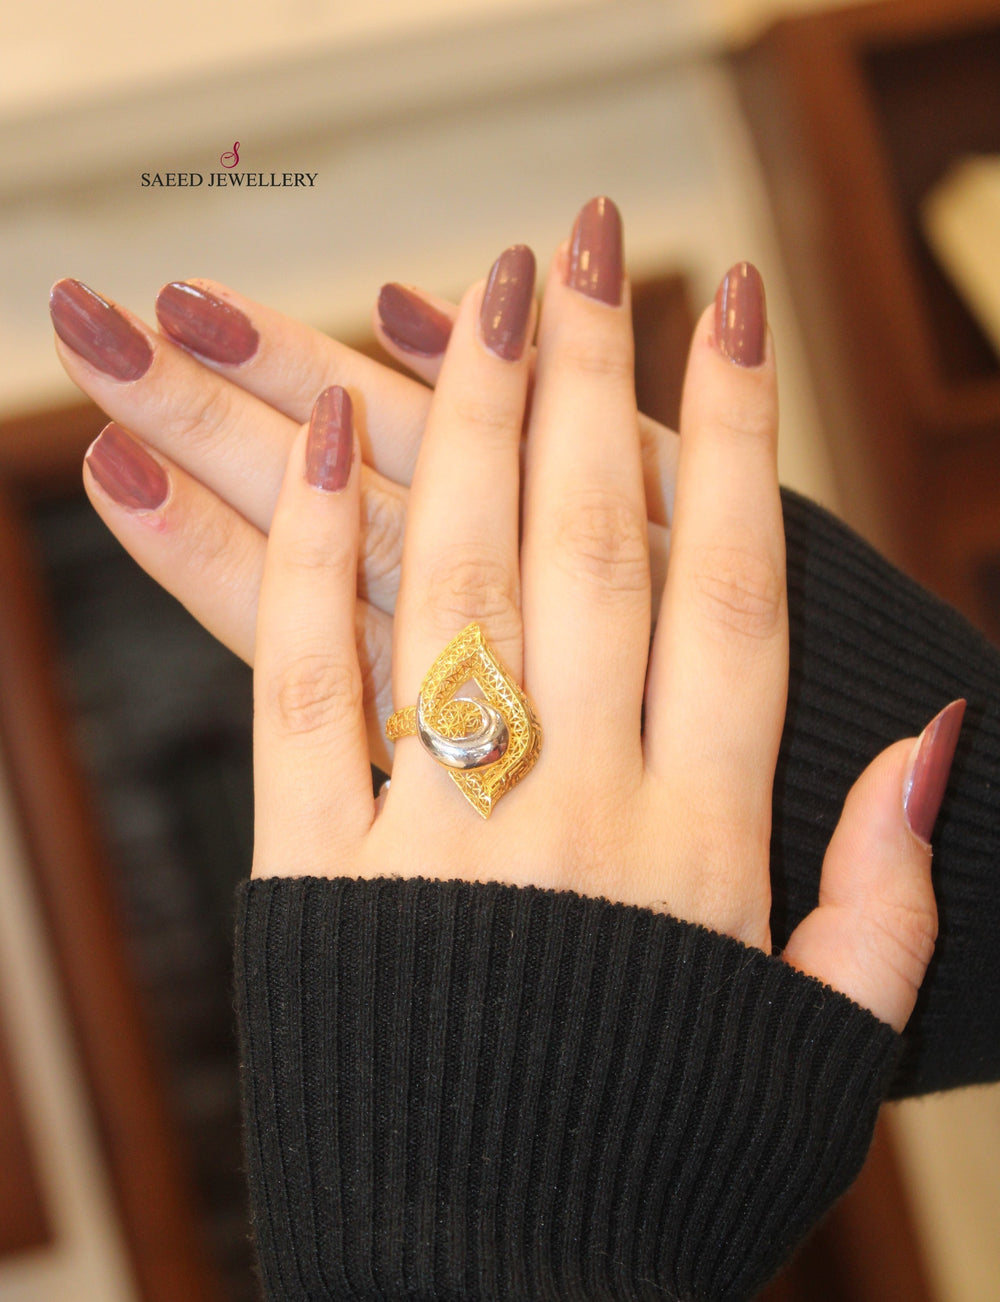 21K Fancy Ring Made of 21K Yellow Gold by Saeed Jewelry-خاتم-اكسترا-31